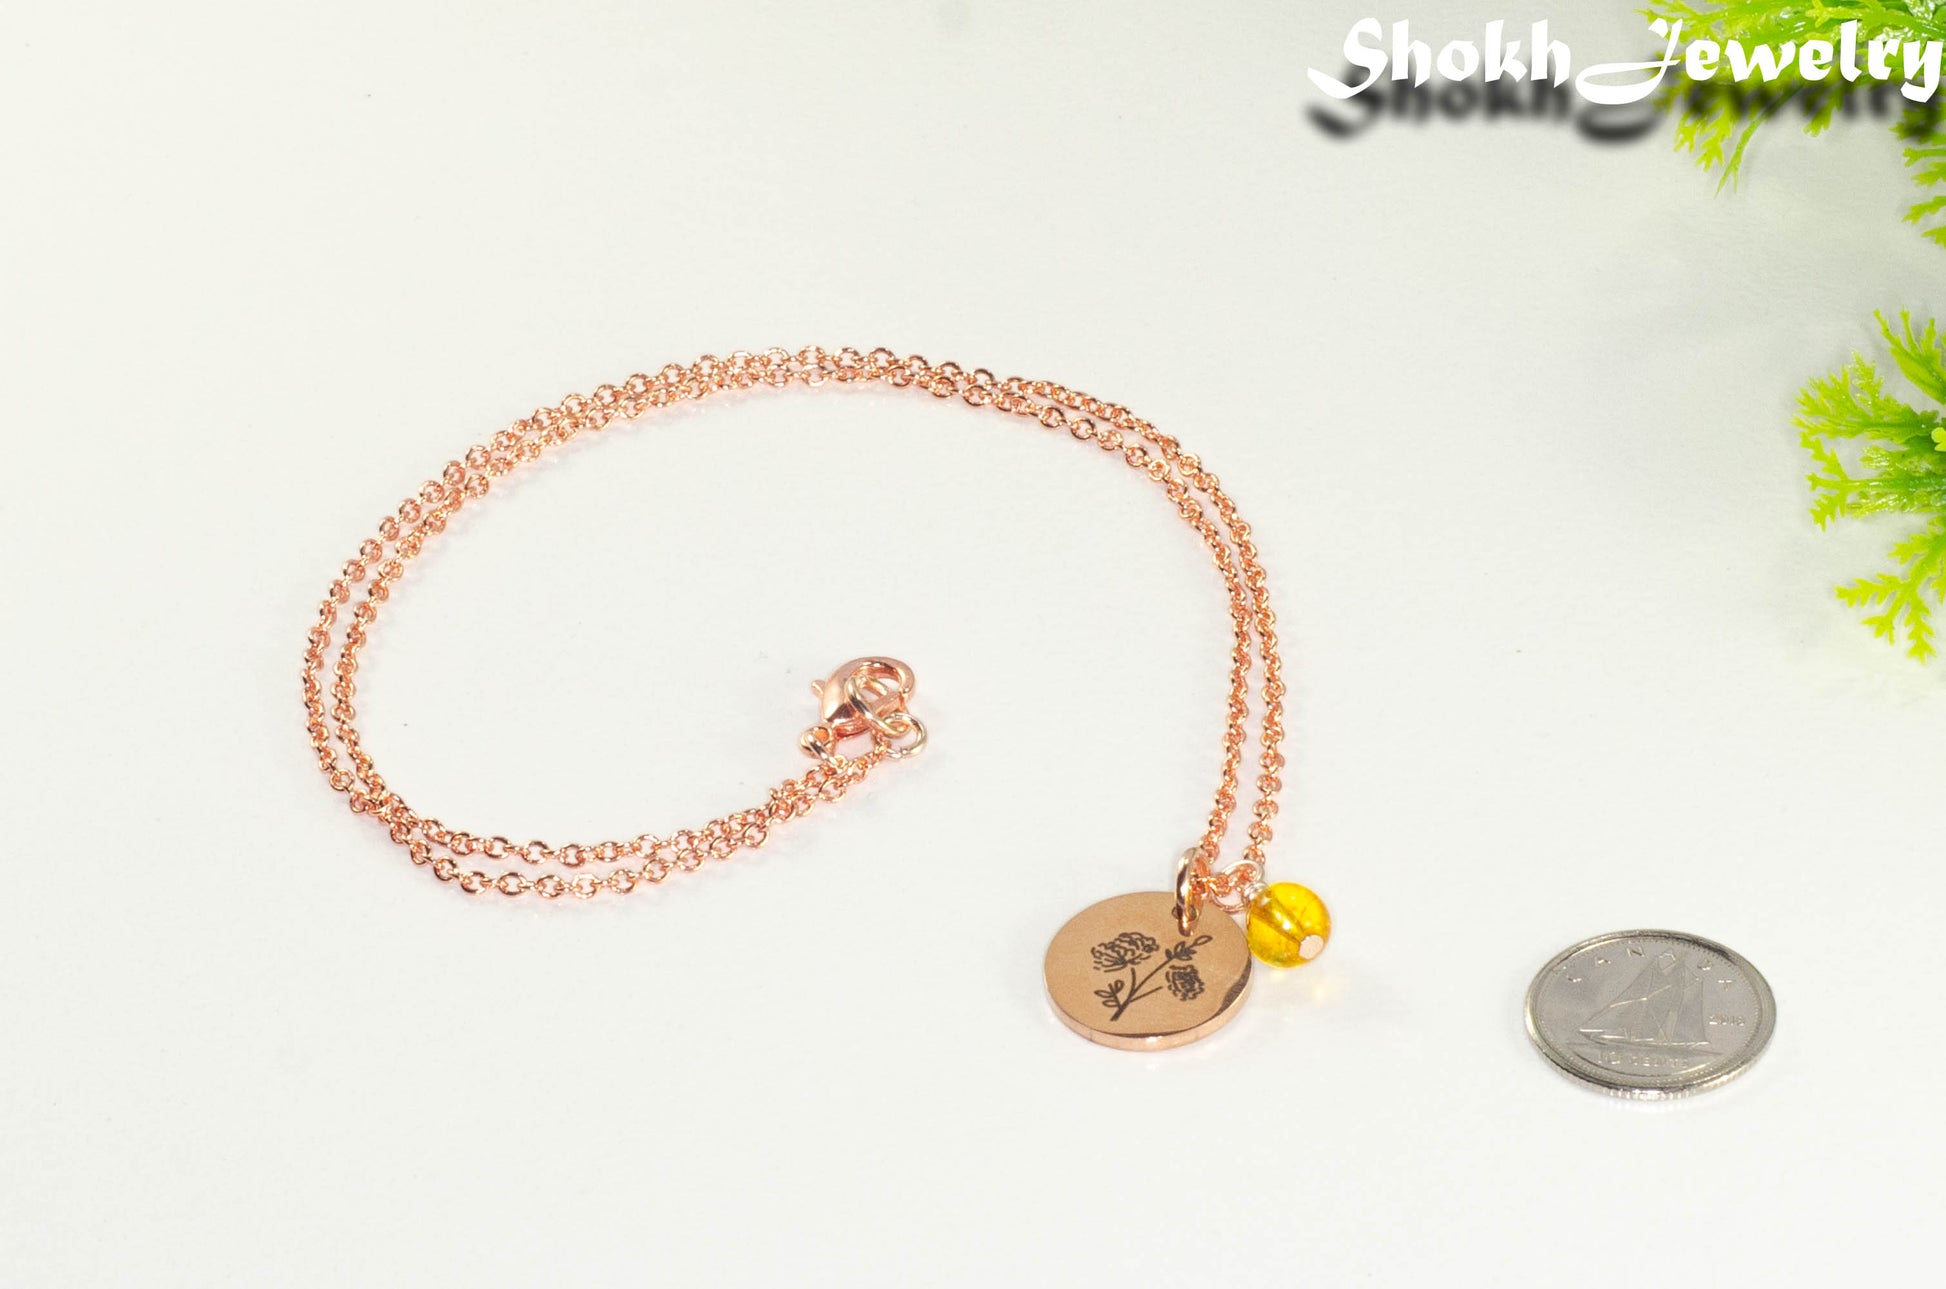 Rose Gold Plated November Birth Flower Necklace with Citrine Birthstone Pendant beside a dime.